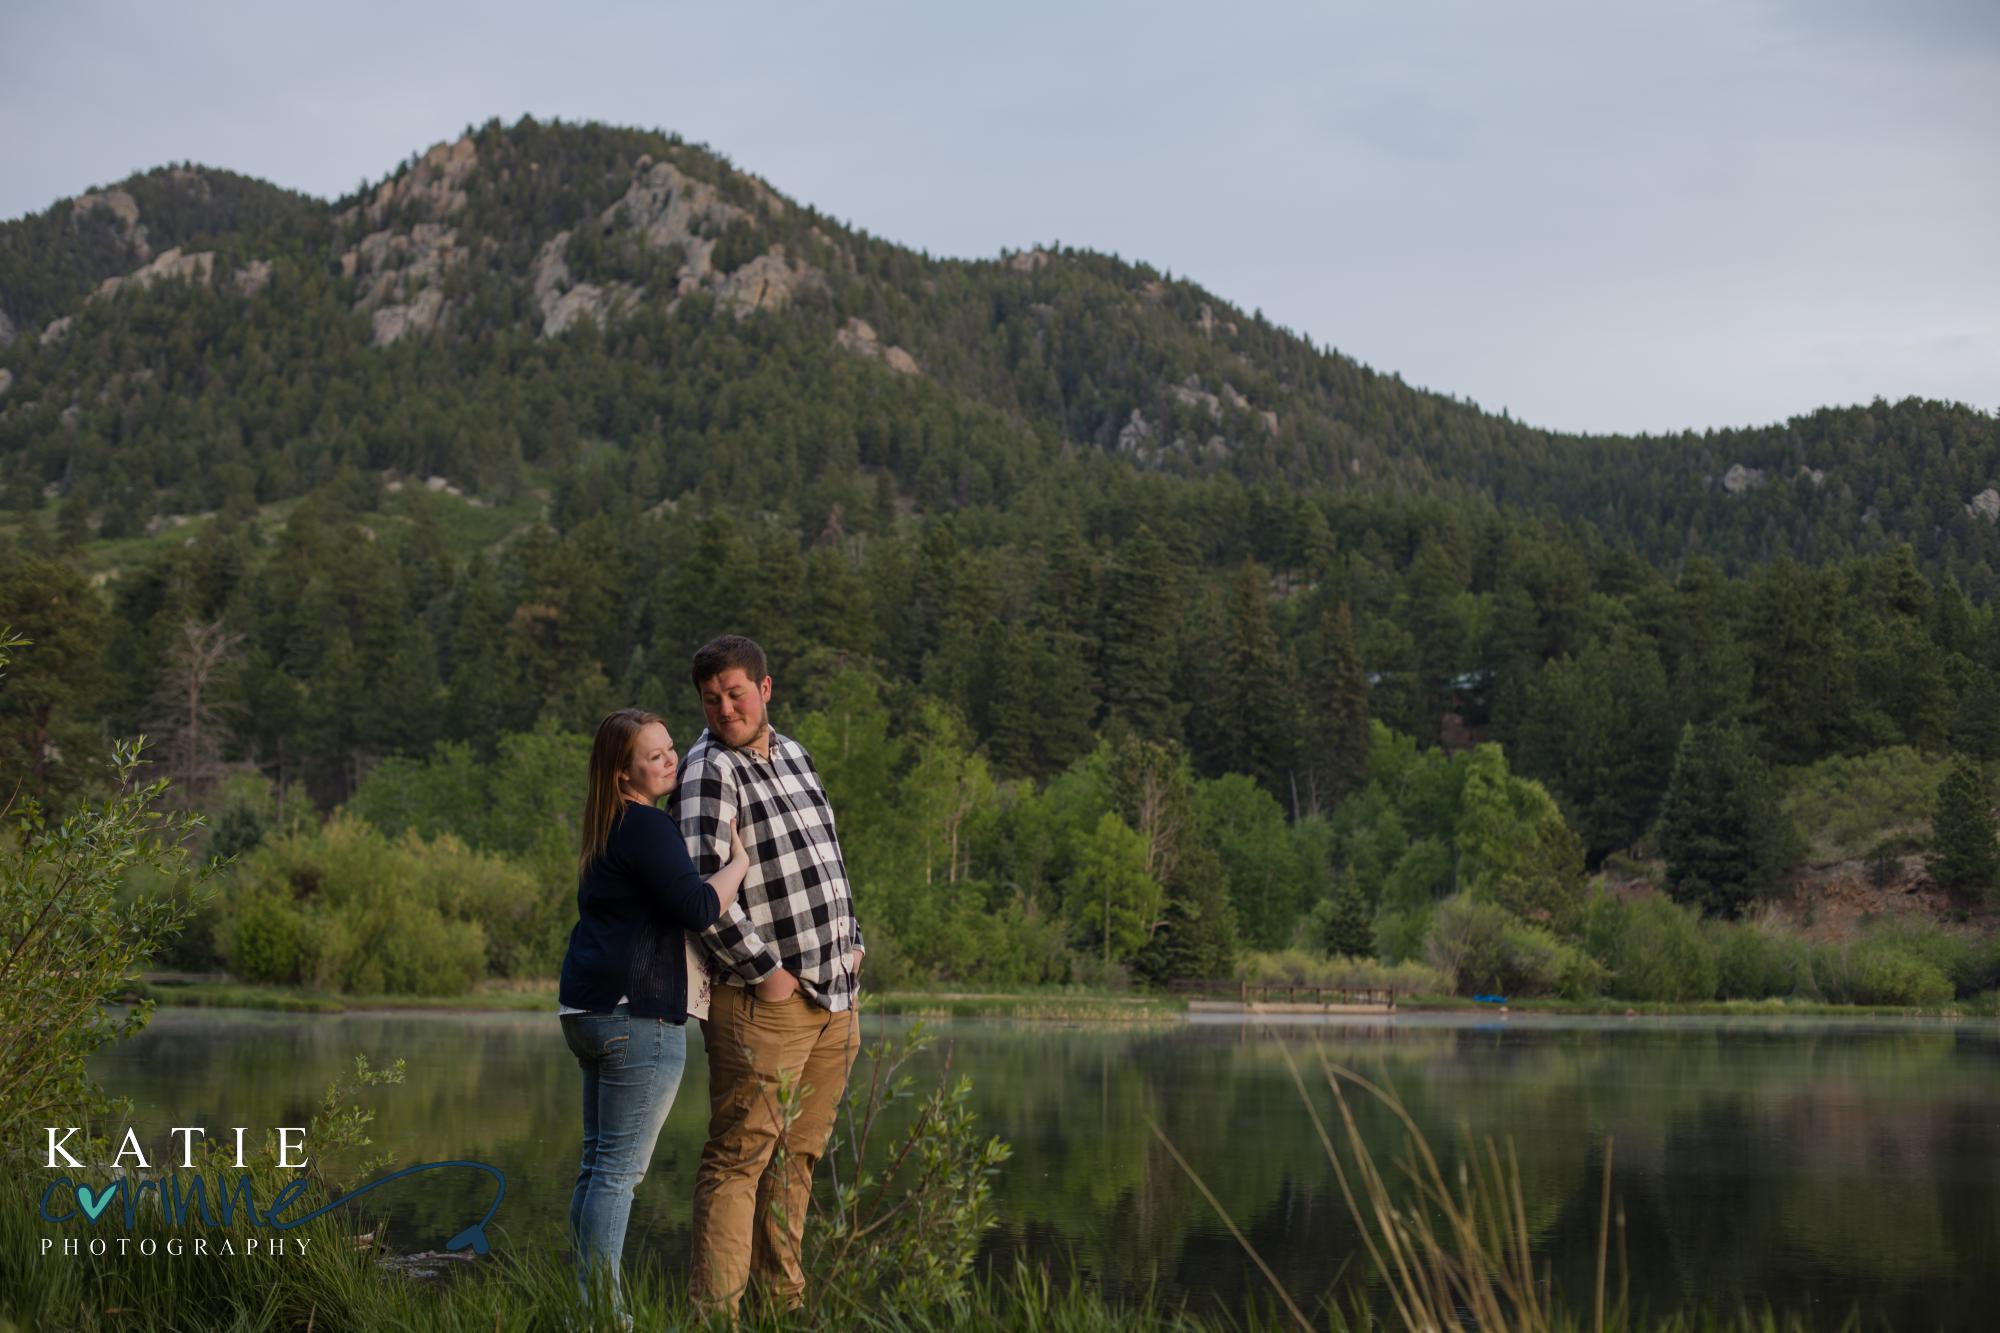 Lakeside engagement photography session in Pueblo, Colorado